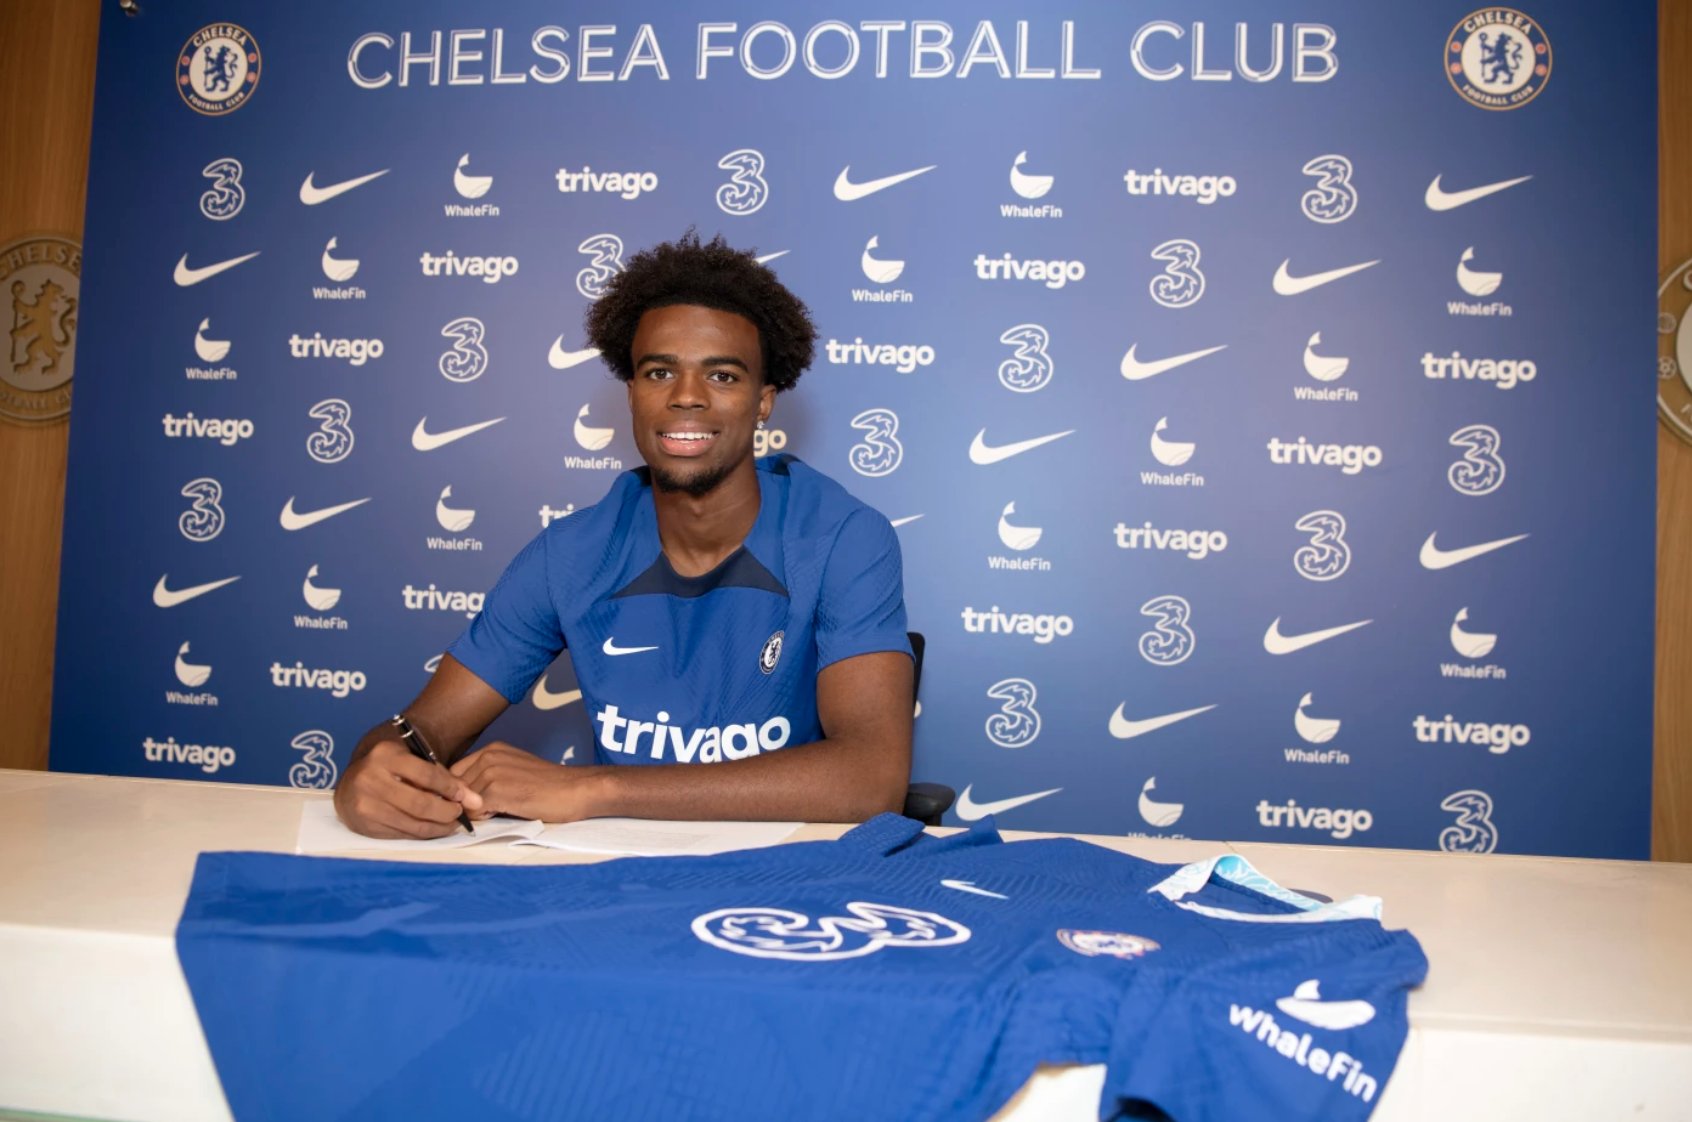 Premier League transfers 2022-23: Chelsea confirm the signing of highly rated Carney Chukwuemeka from Aston Villa until 2028 for a reported fee of around £20m, Check DETAILS